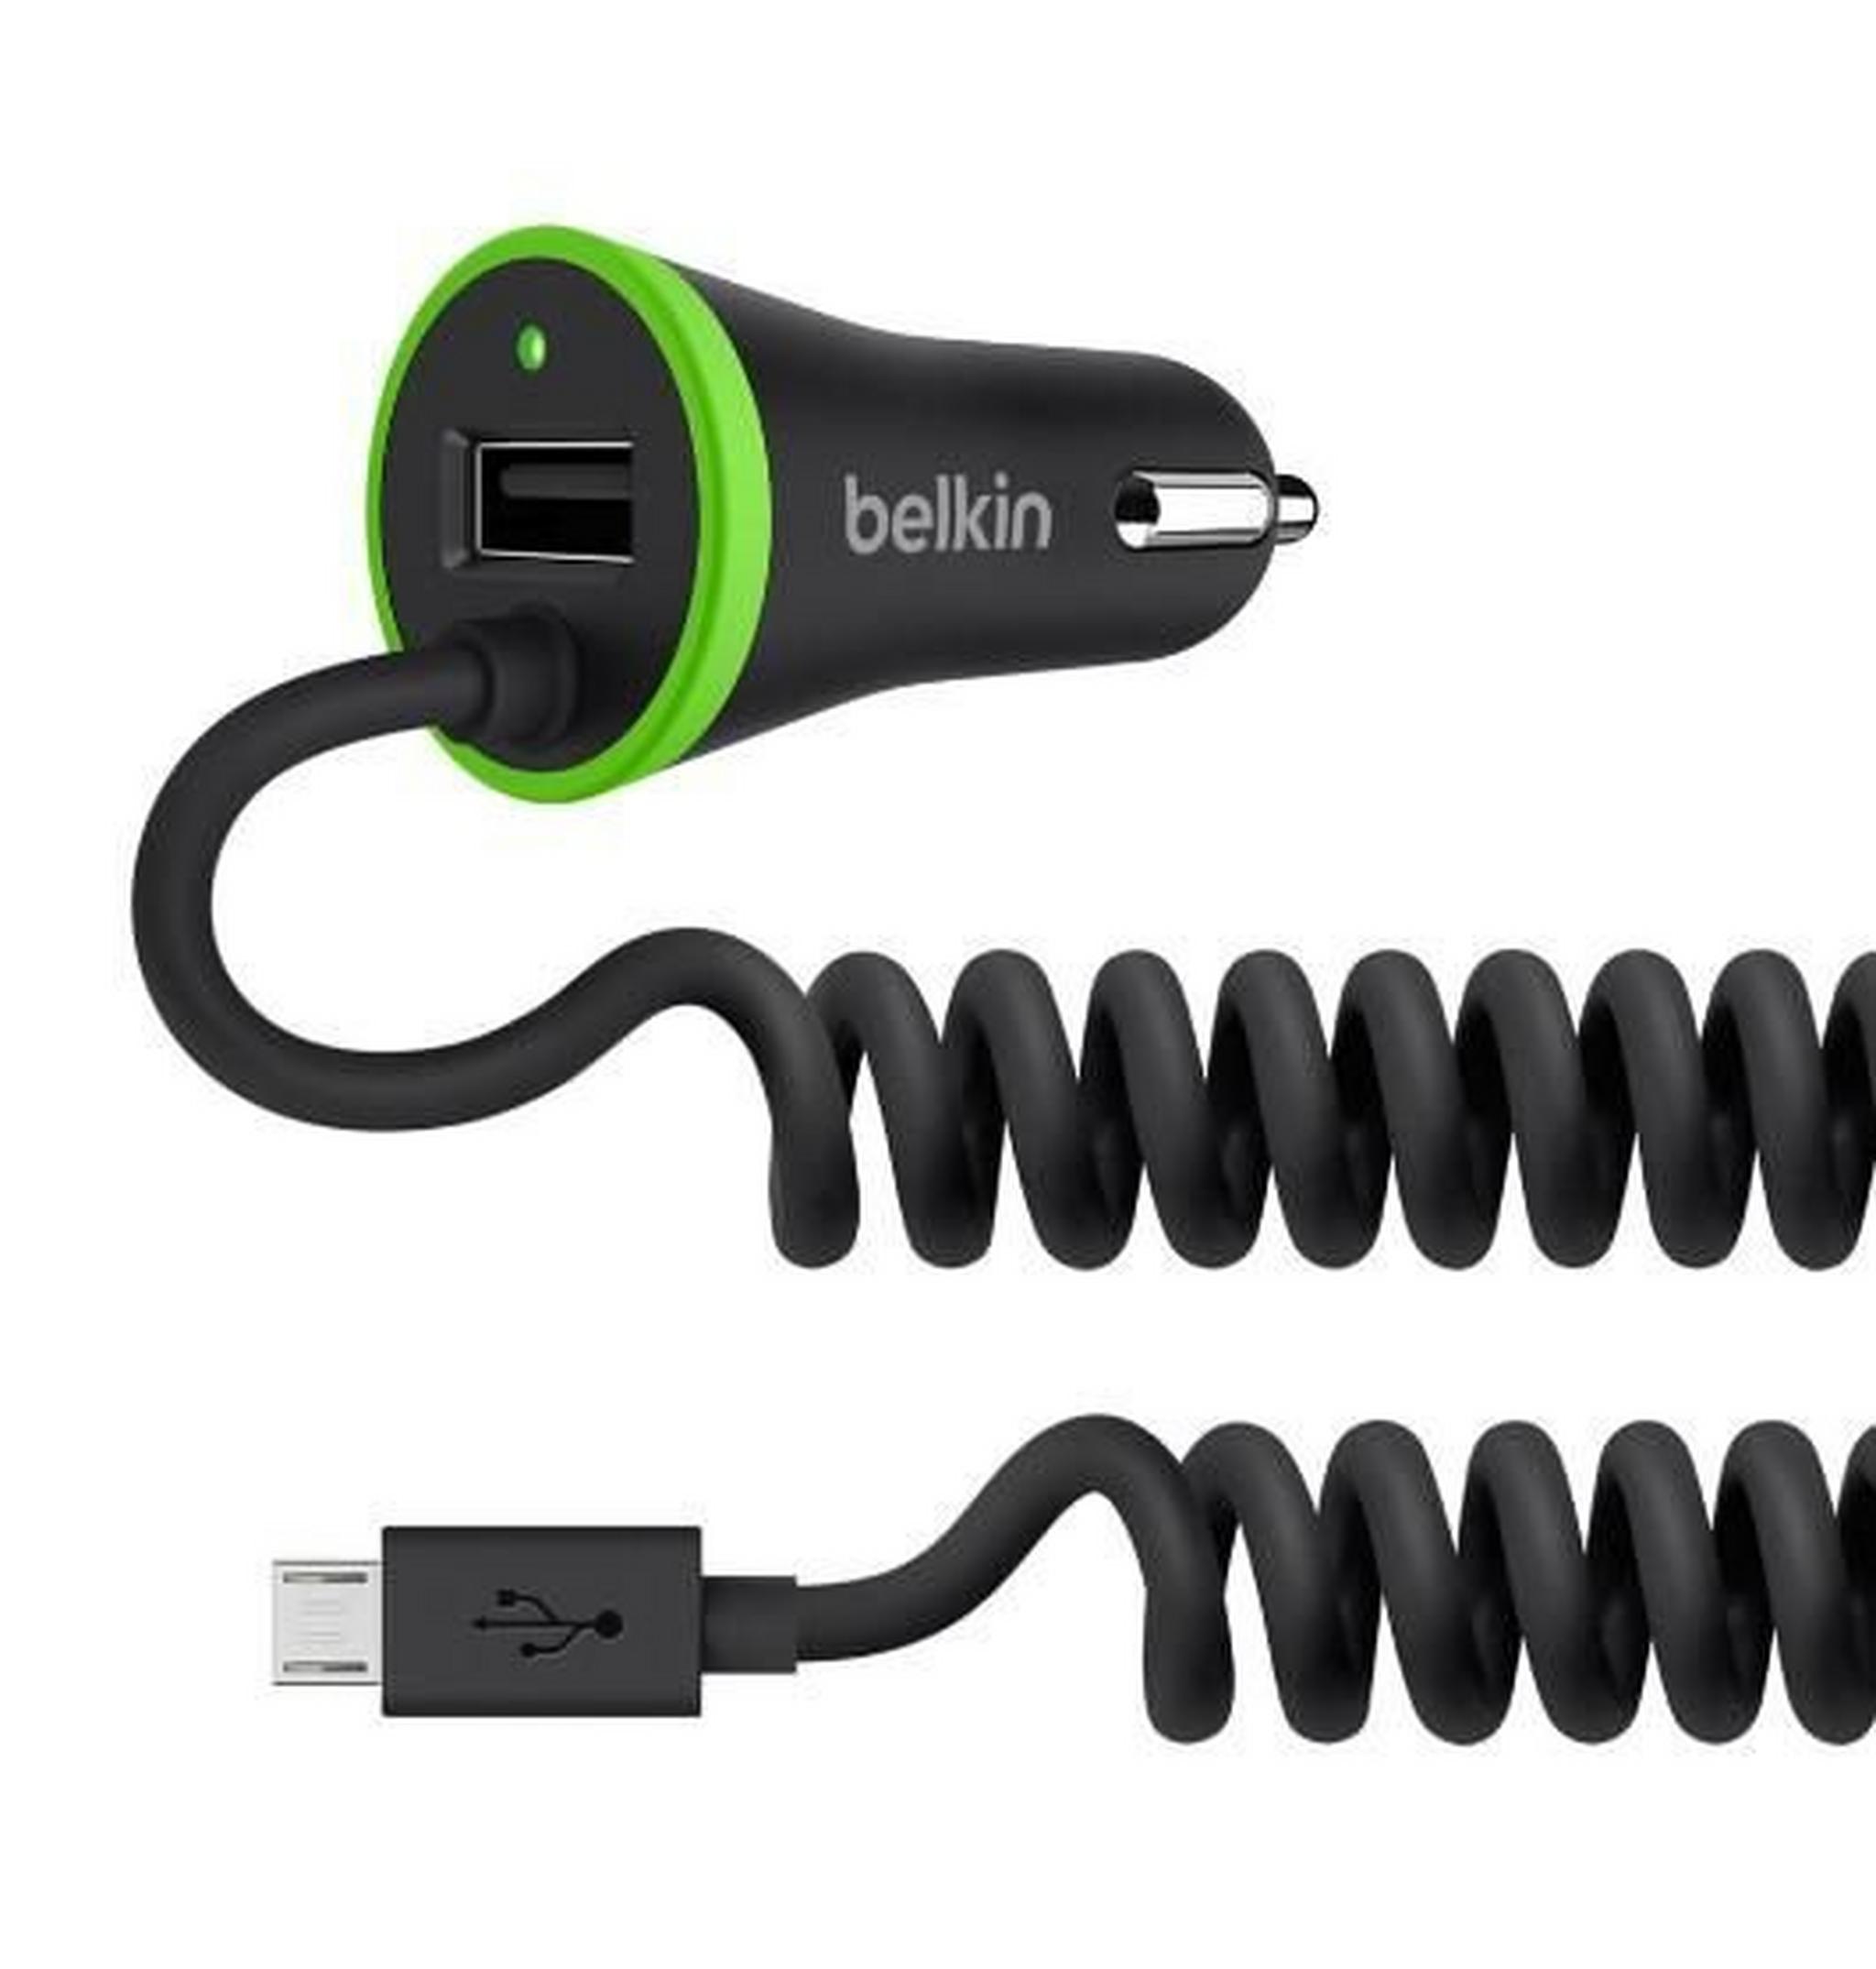 Belkin 3.4a Car Charger With Micro USB - Black F8M890bt04